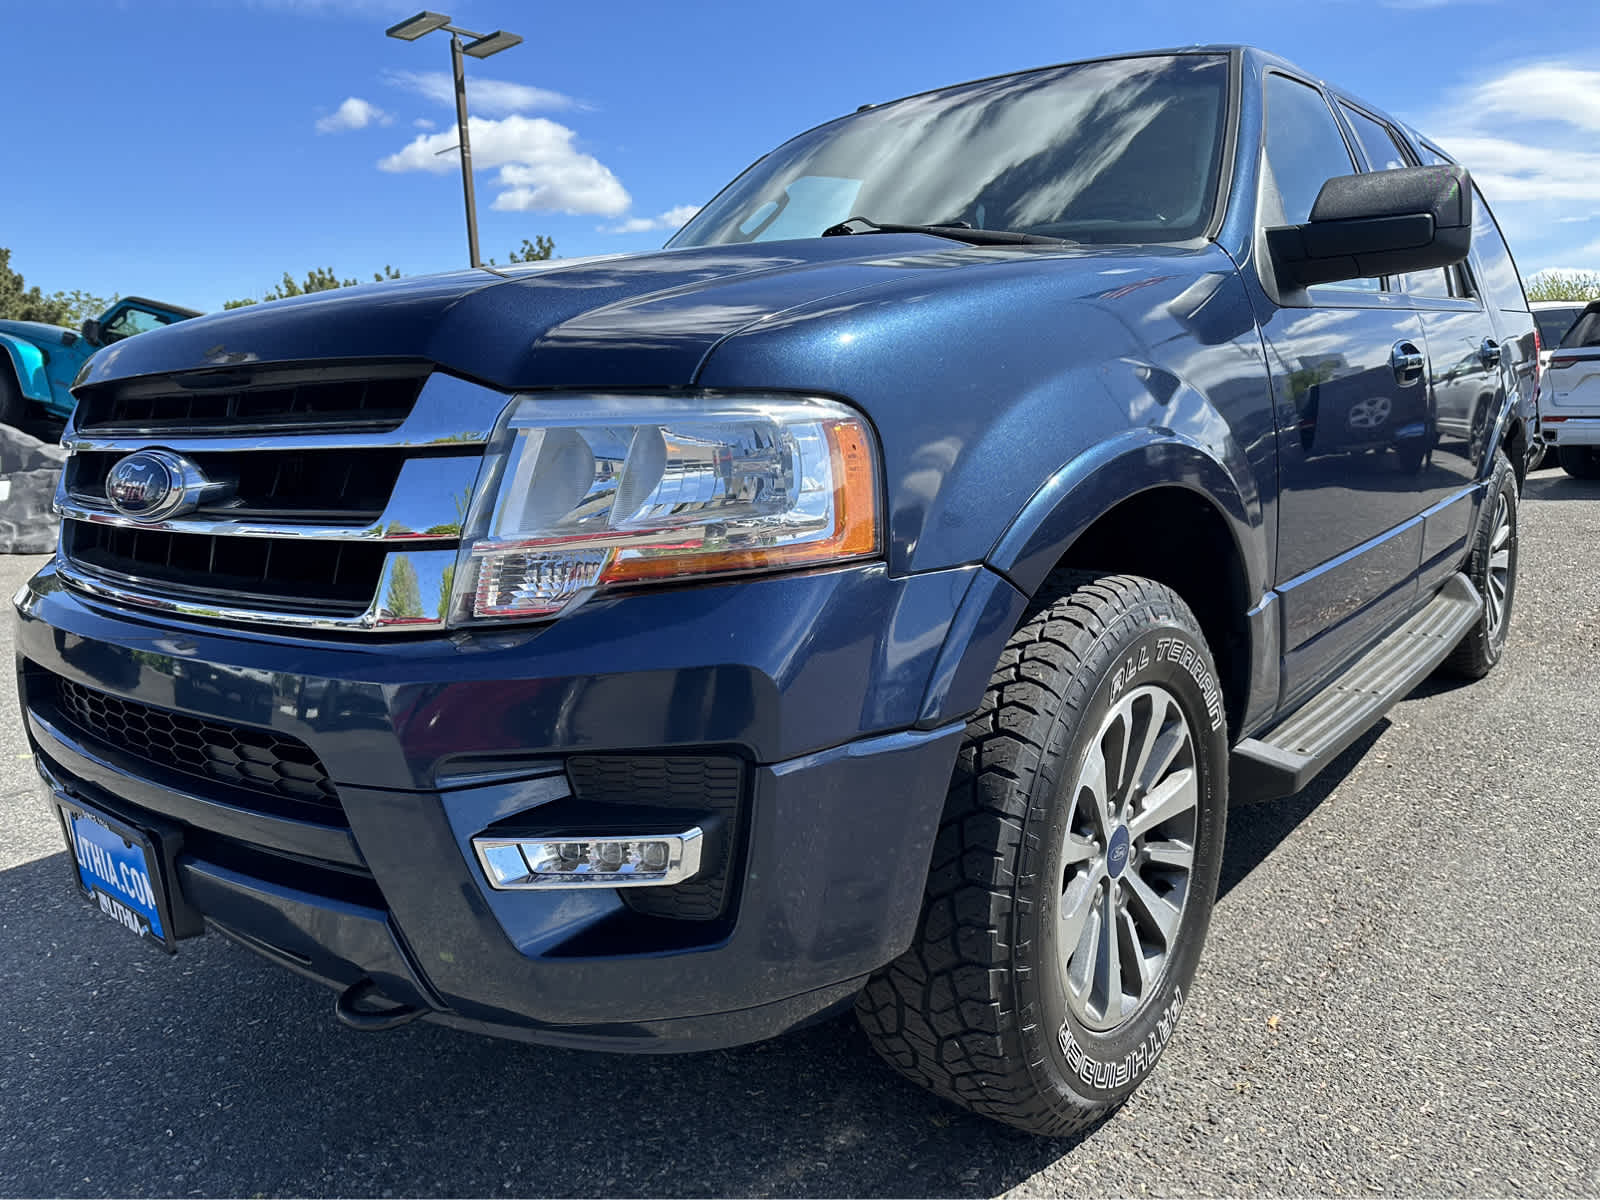 2015 Ford Expedition XLT Hero Image